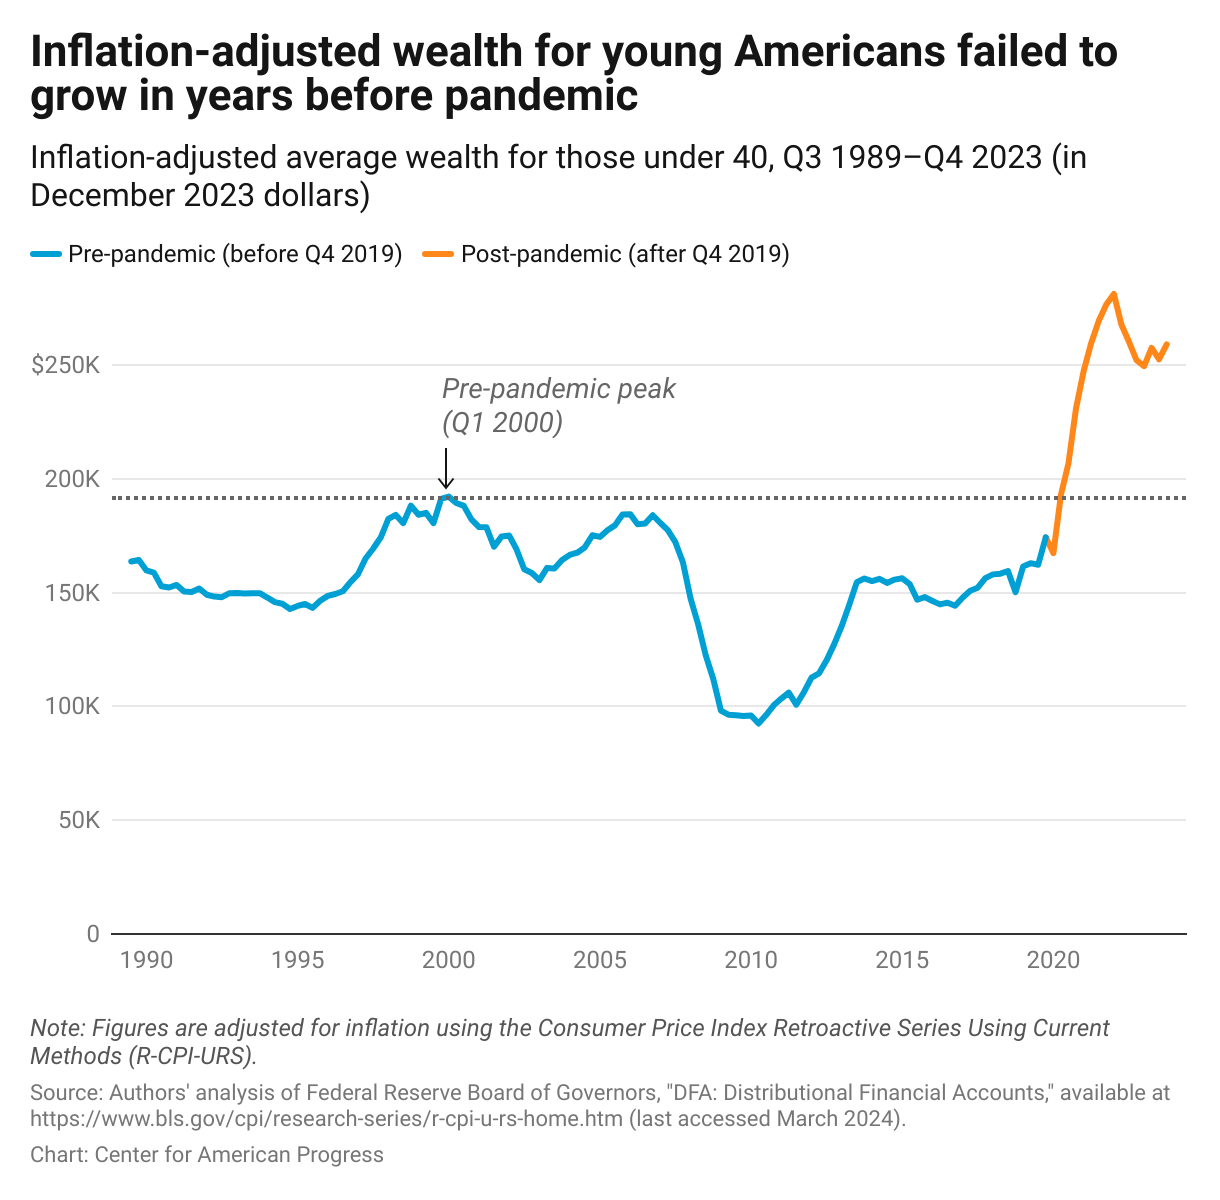 Line chart showing that inflation-adjusted average wealth of households under 40 mostly moved between $100,000 and $200,00 from 1989 to 2019, reaching $259,000 in Q4 2023.